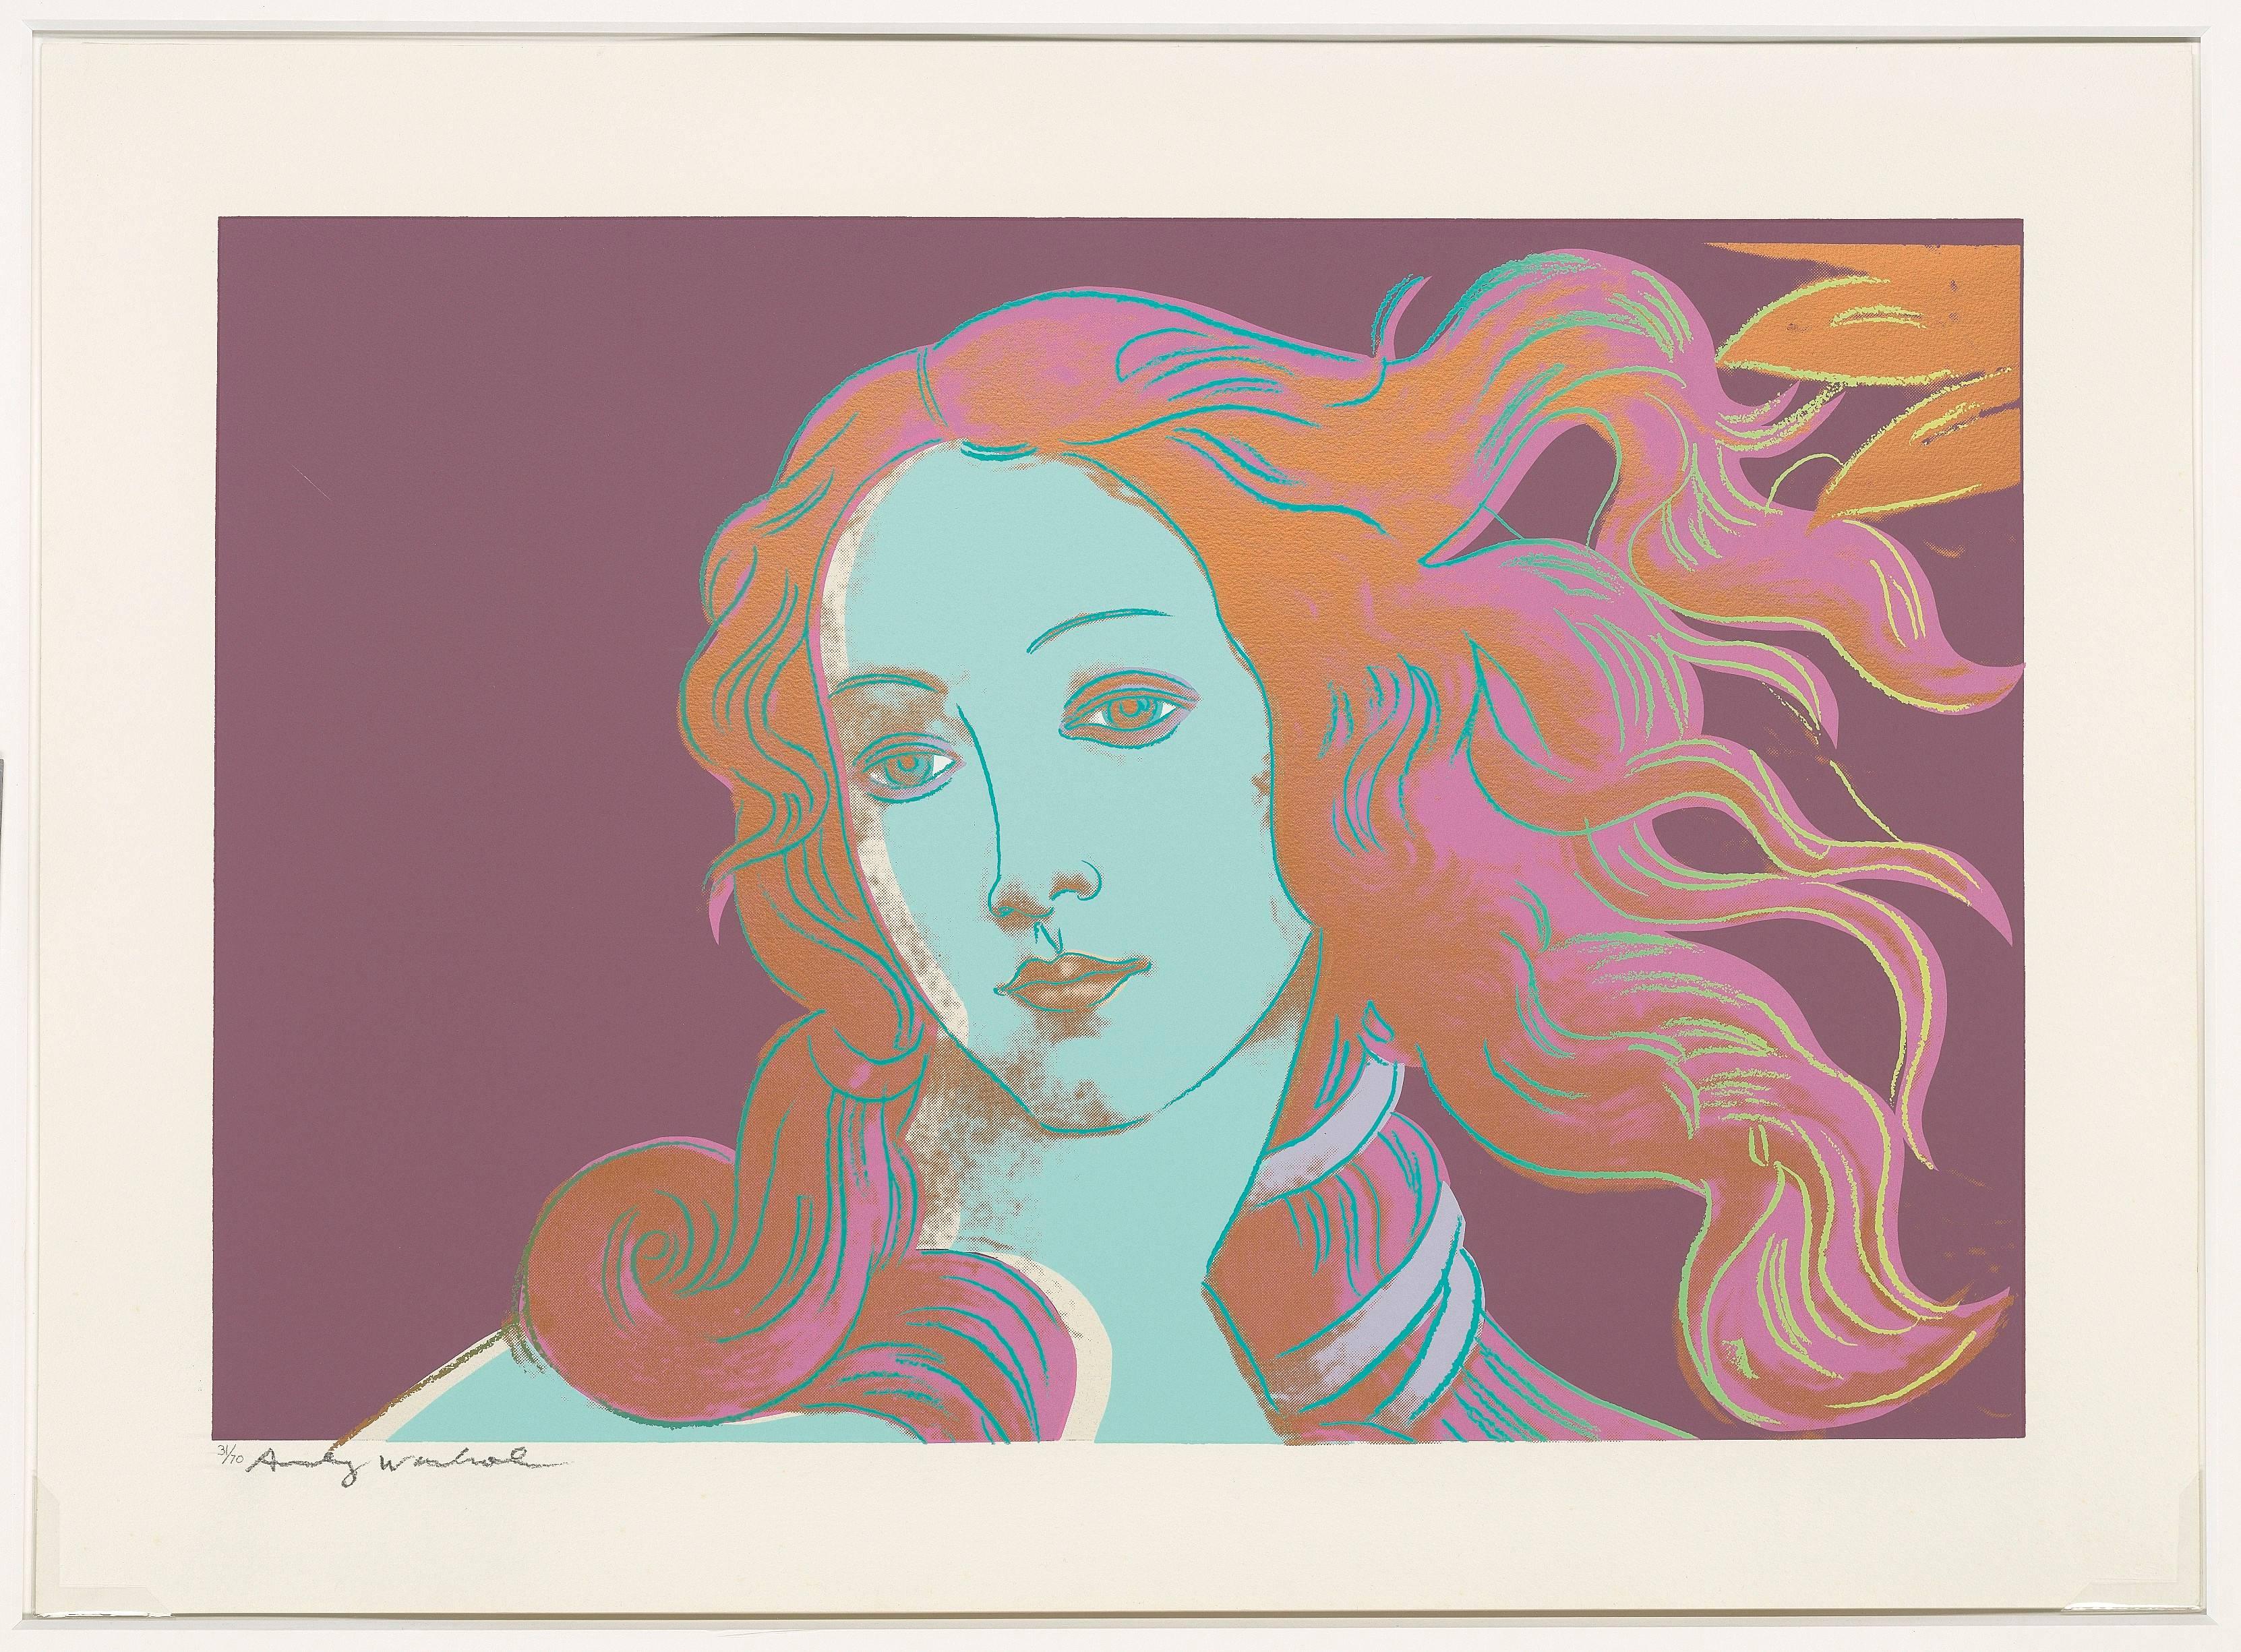 Details of Renaissance Paintings (Sandro Botticelli, Birth of Venus 1482) F&S II - Print by Andy Warhol